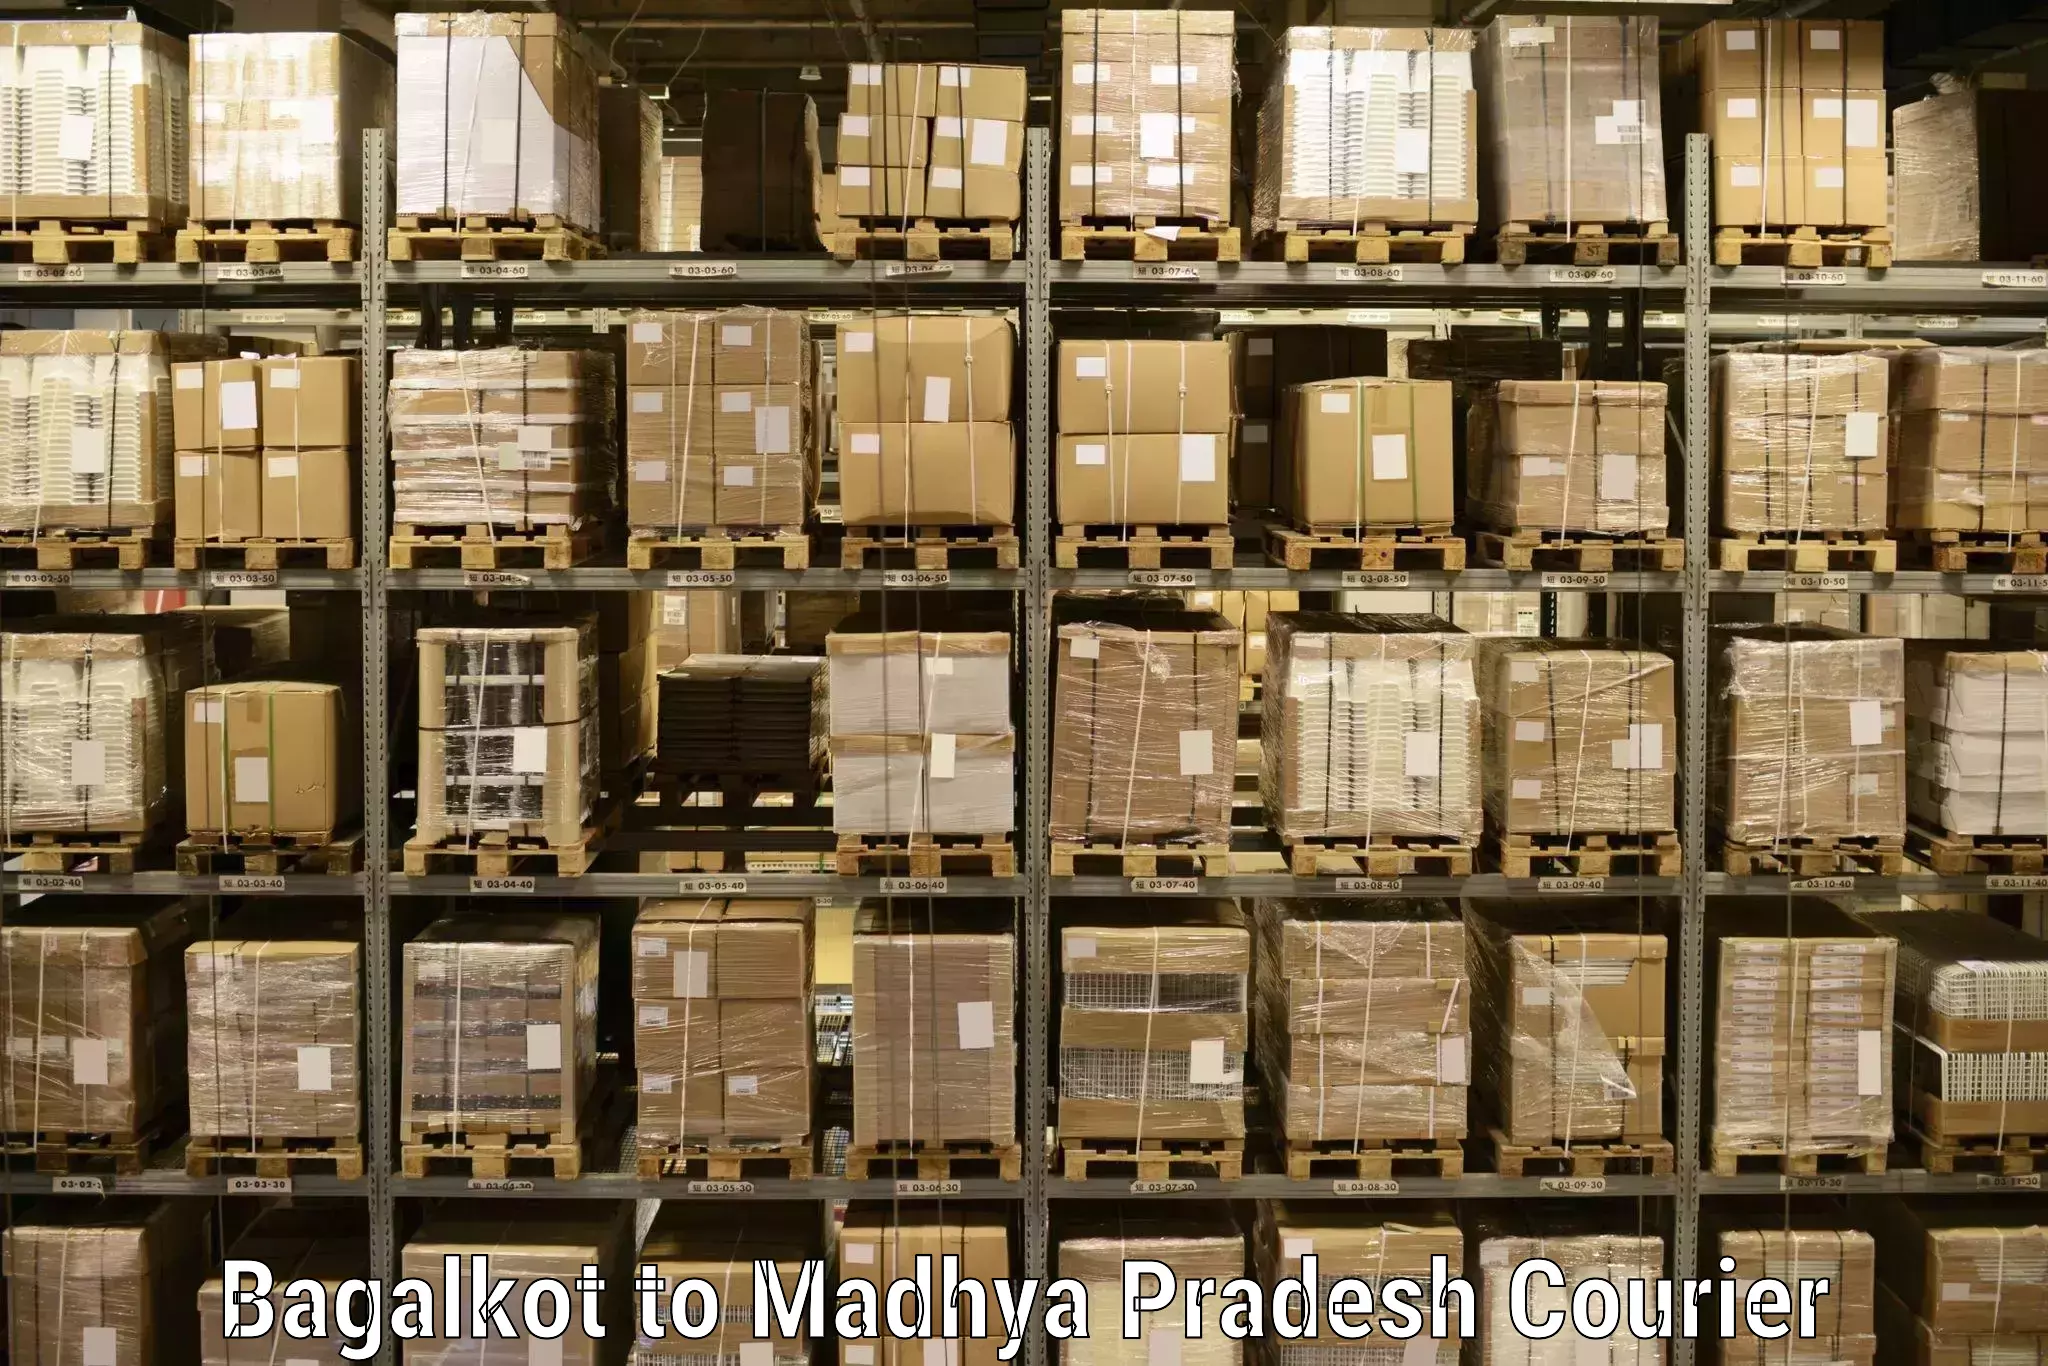 Modern delivery technologies Bagalkot to Jatara